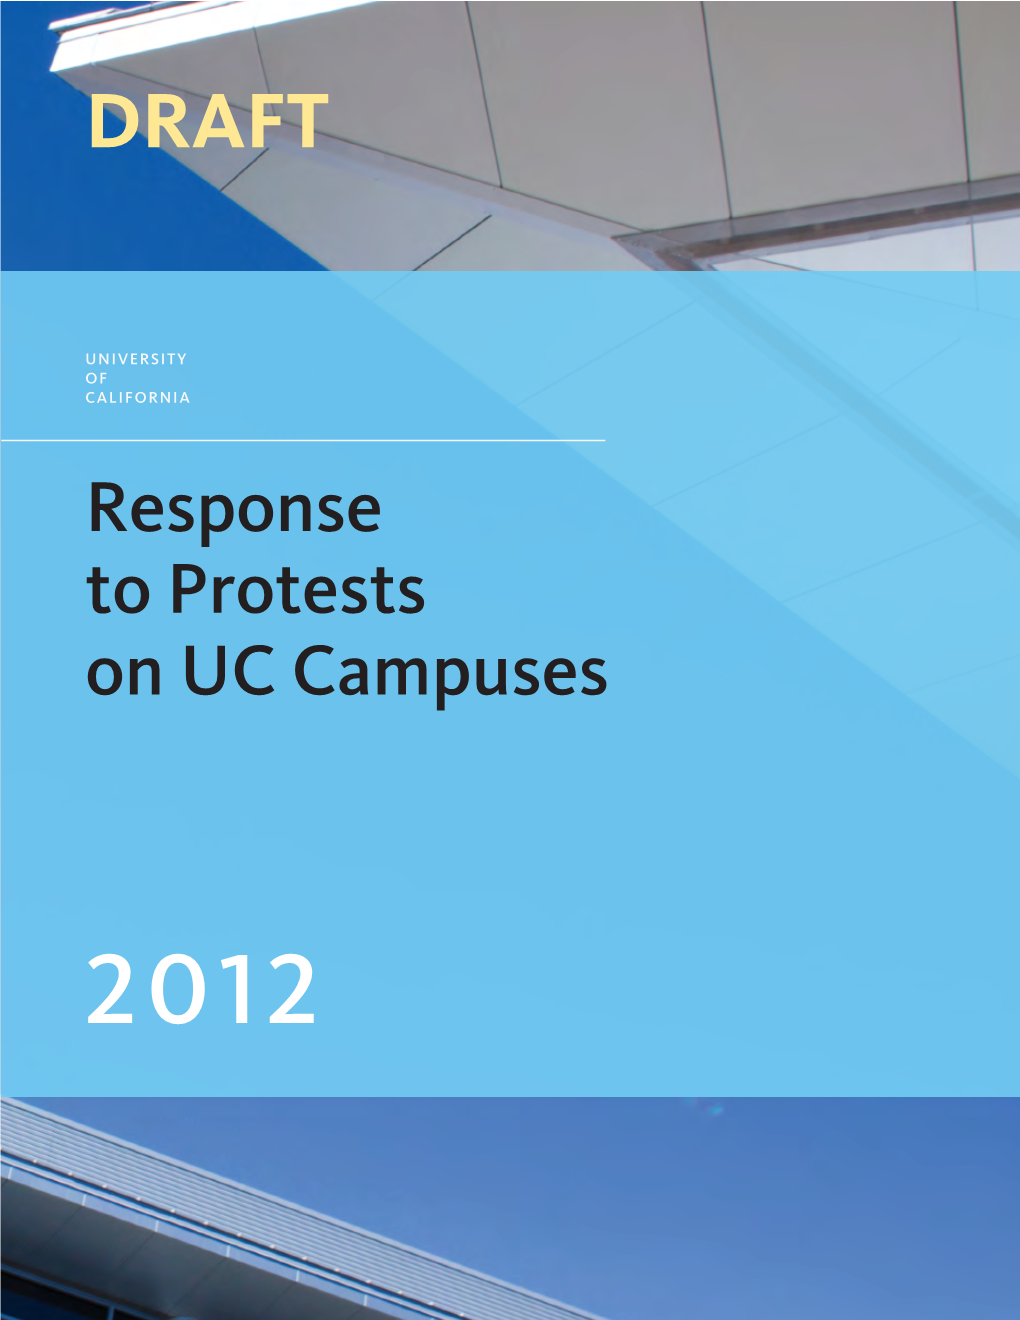 Response to Protests on UC Campuses